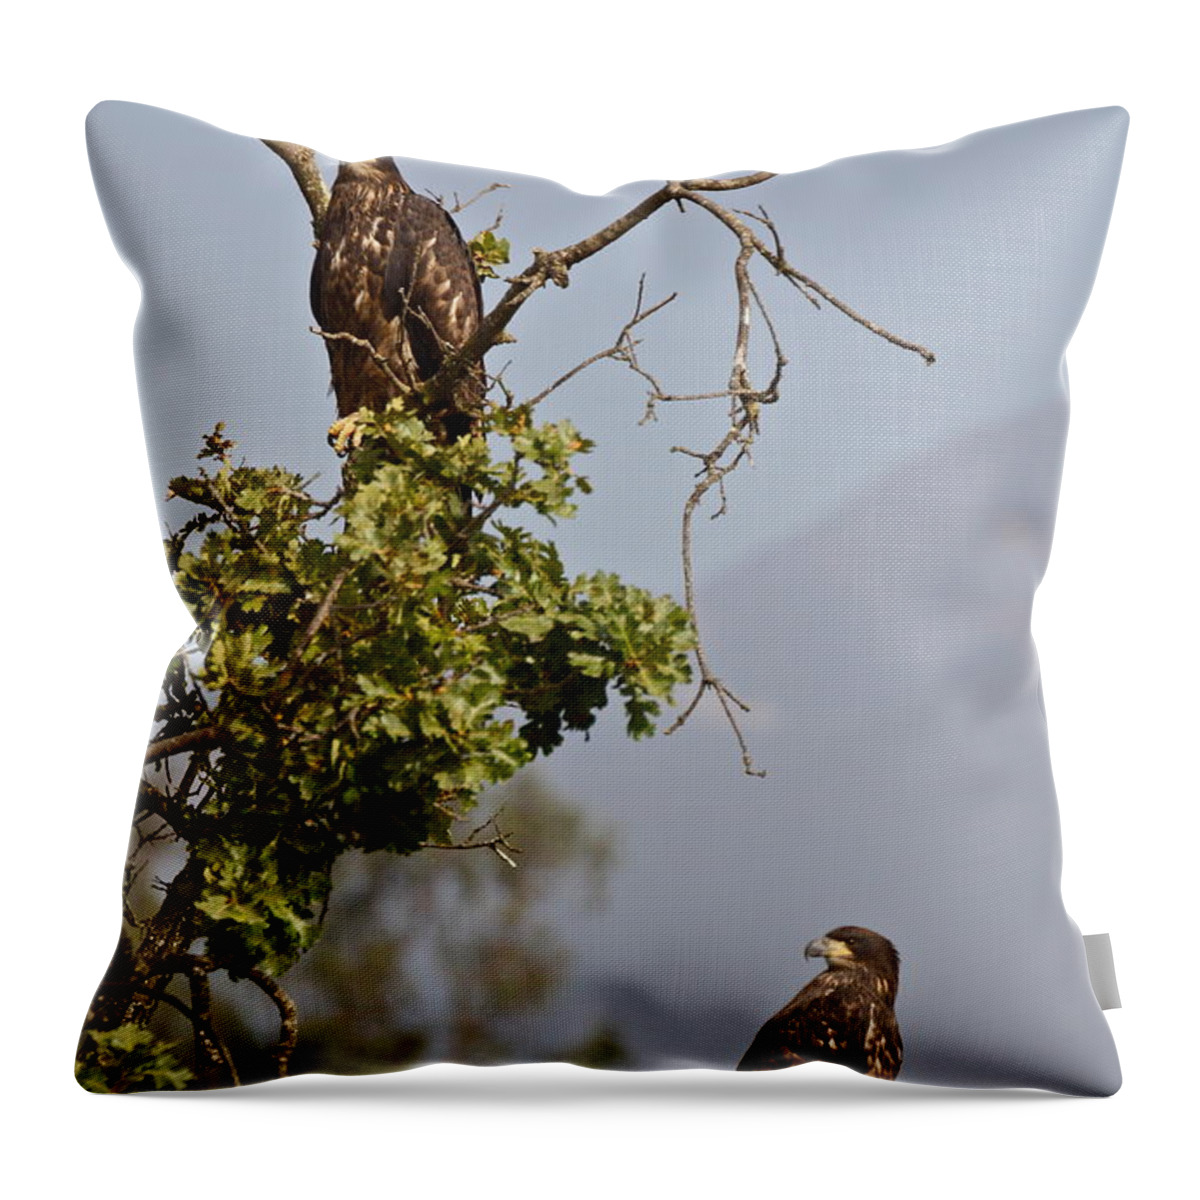 Birds Throw Pillow featuring the photograph Casitas Eagles Eleven by Diana Hatcher